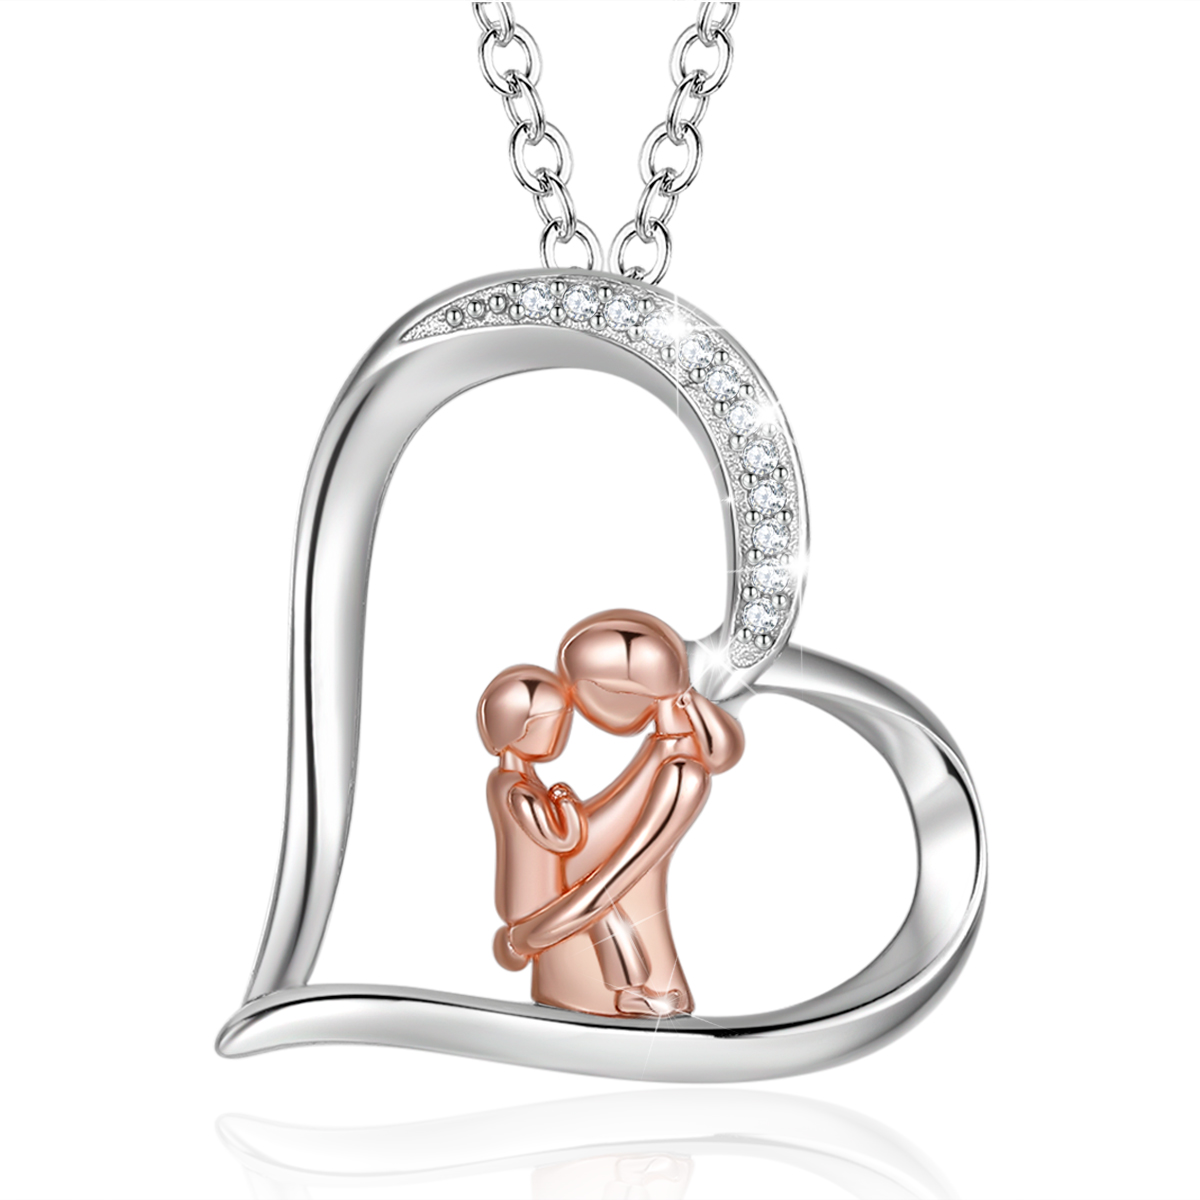 Merryshine Jewelry S925 Sterling Silver Plating Rose Gold Mom and Son Heart Necklace for Mother